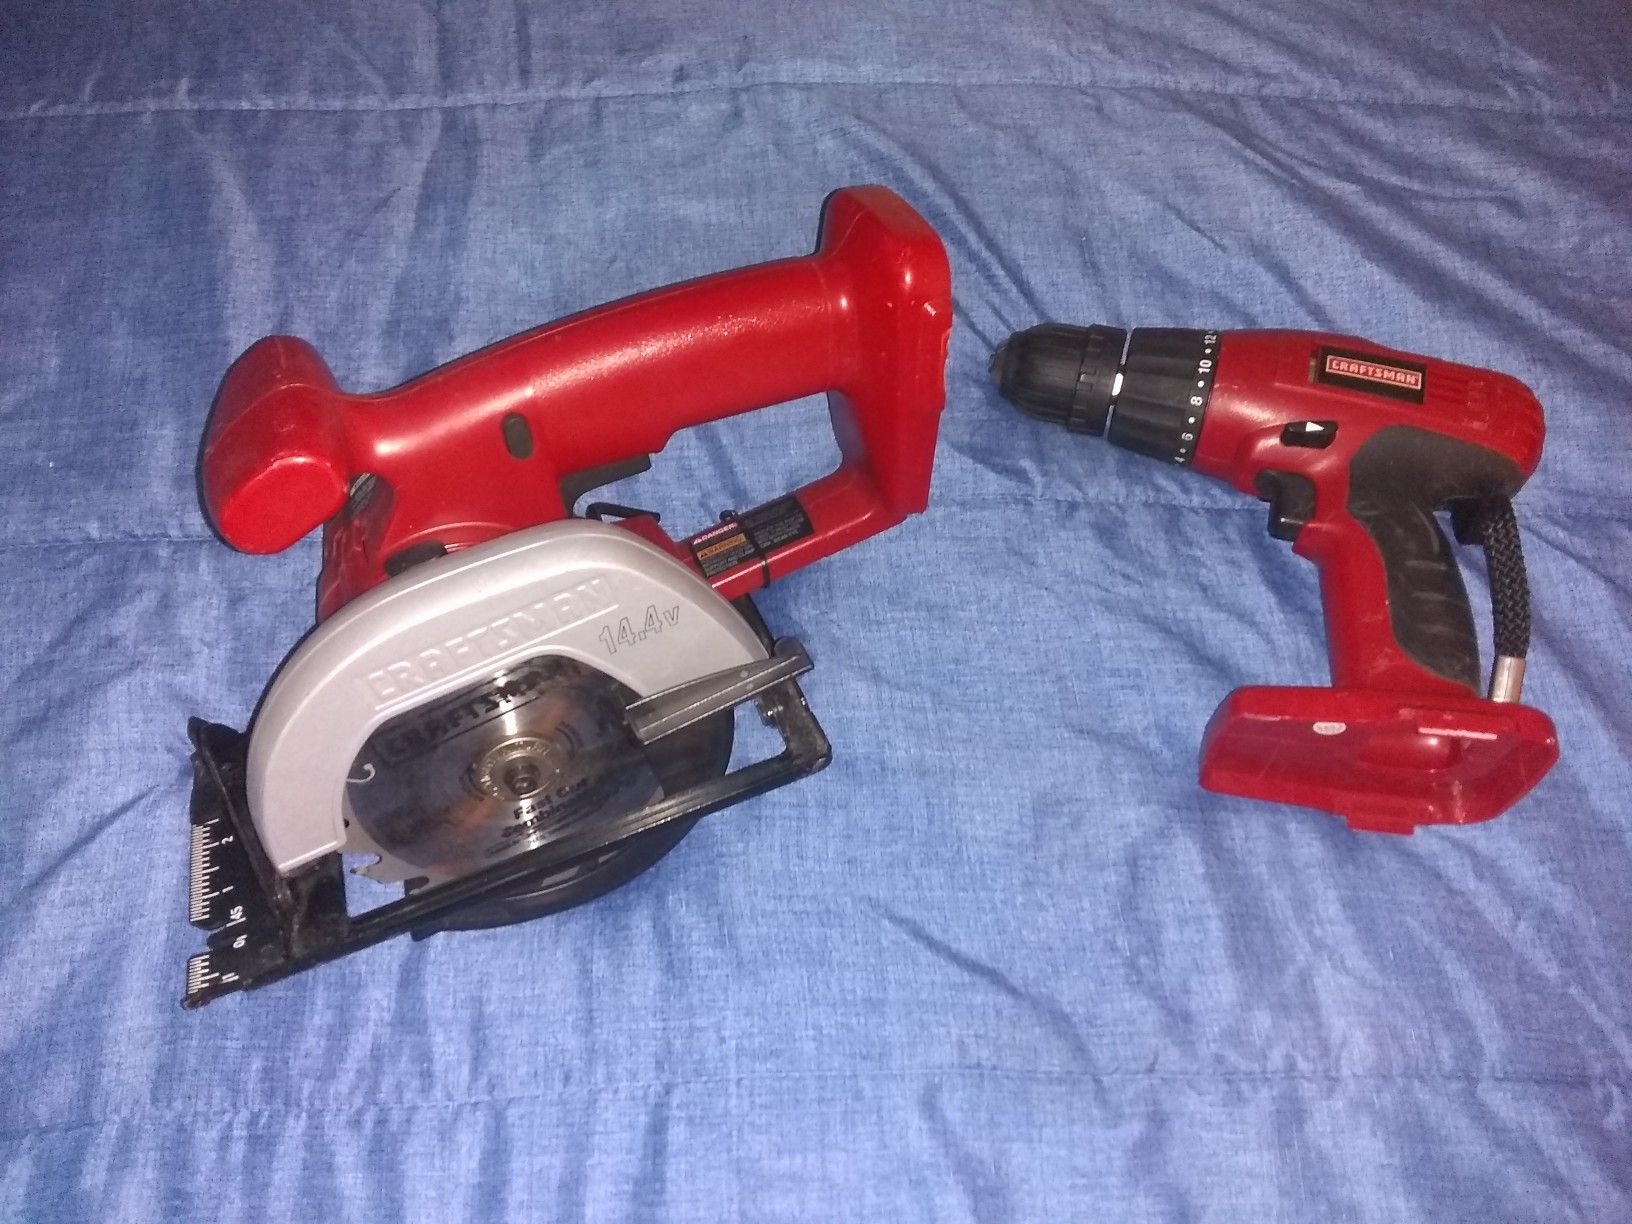 Craftsman 14.4 volt Saw and drill